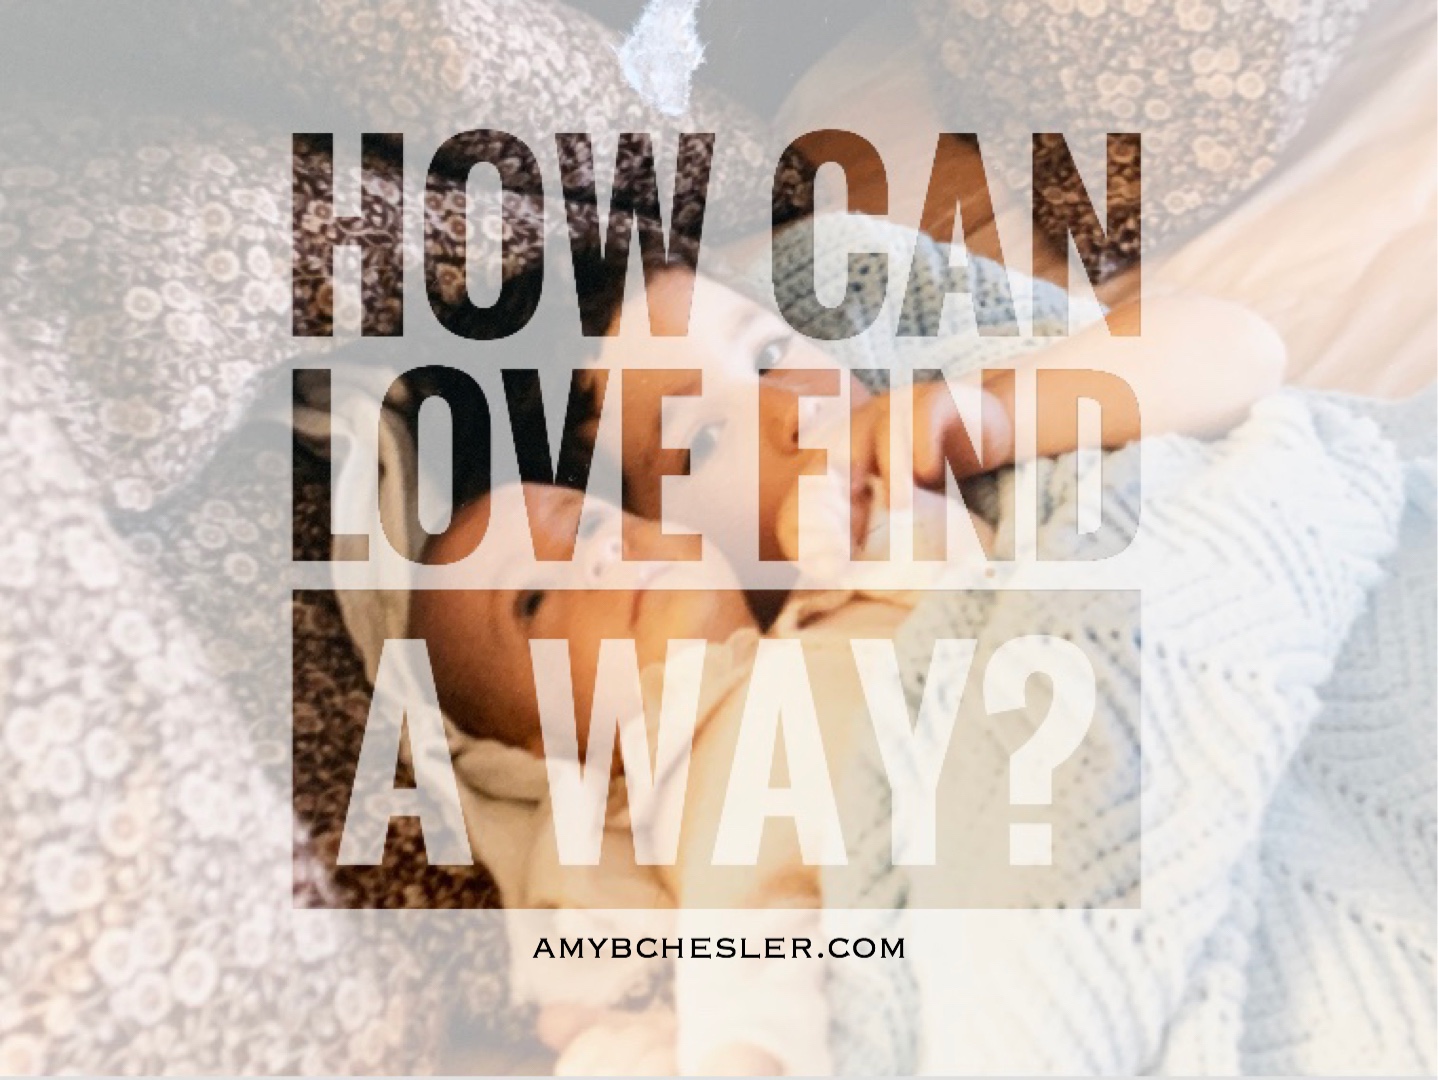 How Can Love Find a Way?